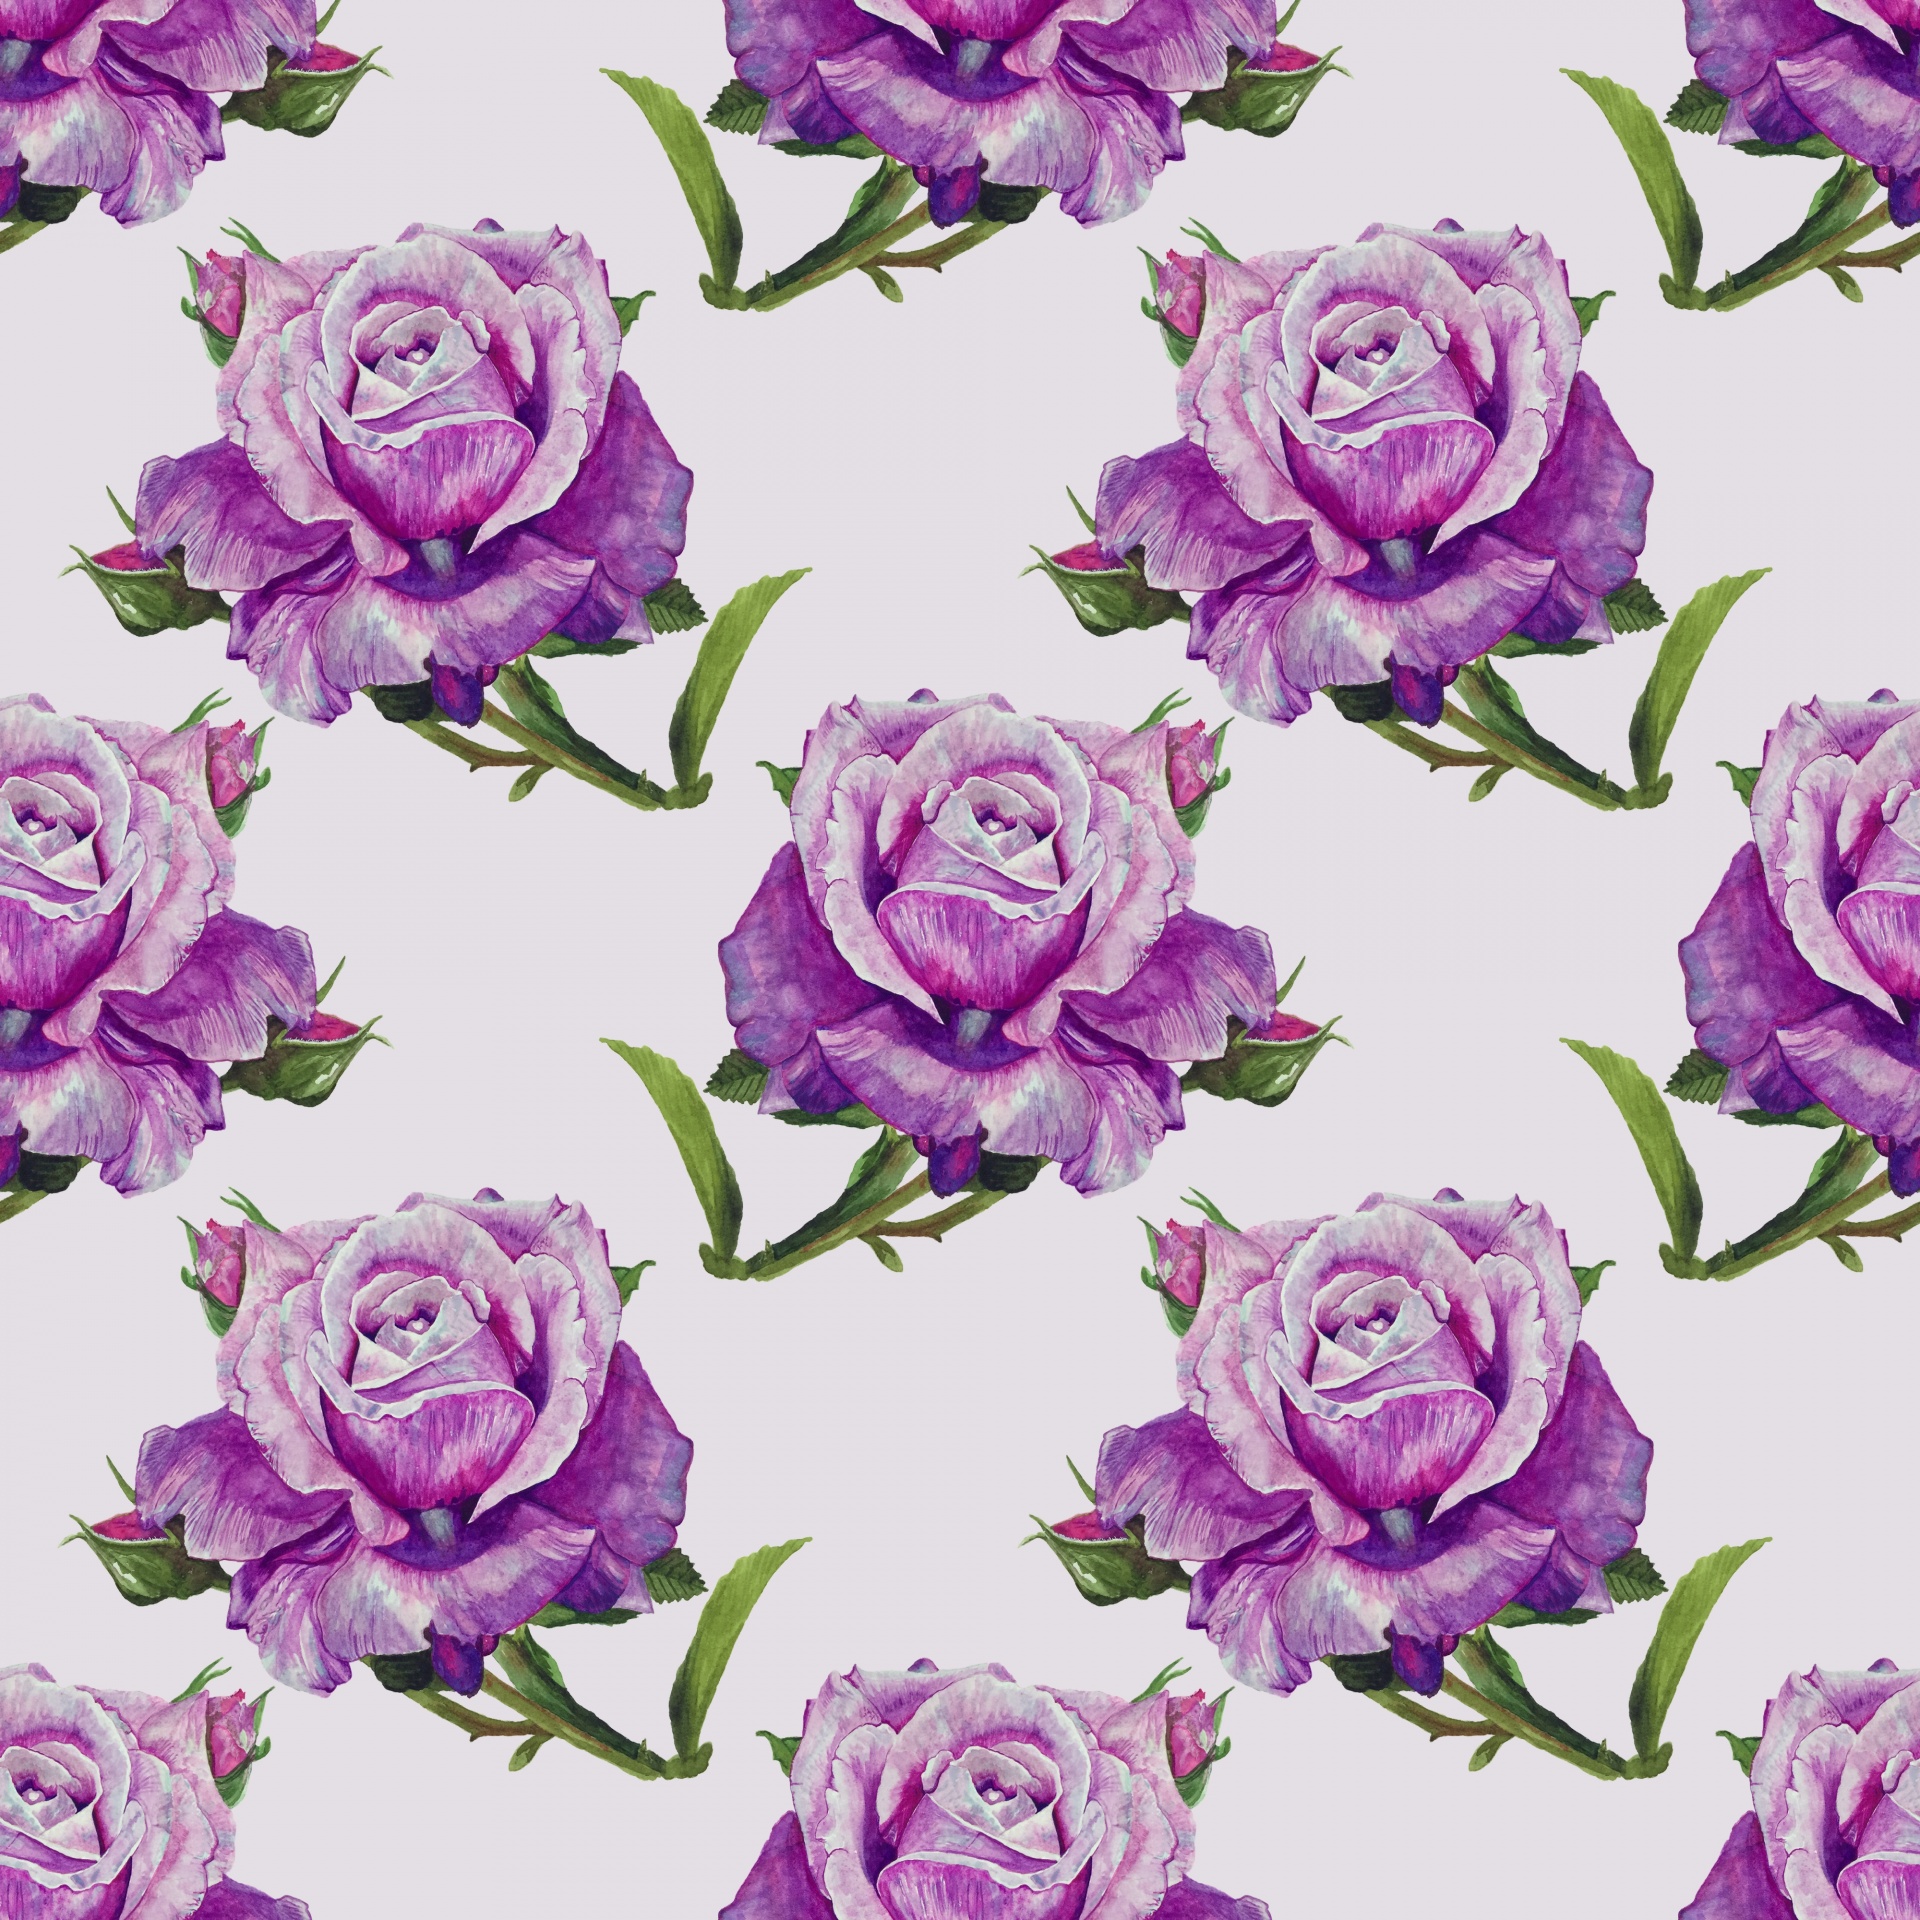 Lilac roses watercolor painting vintage seamless wallpaper pattern background